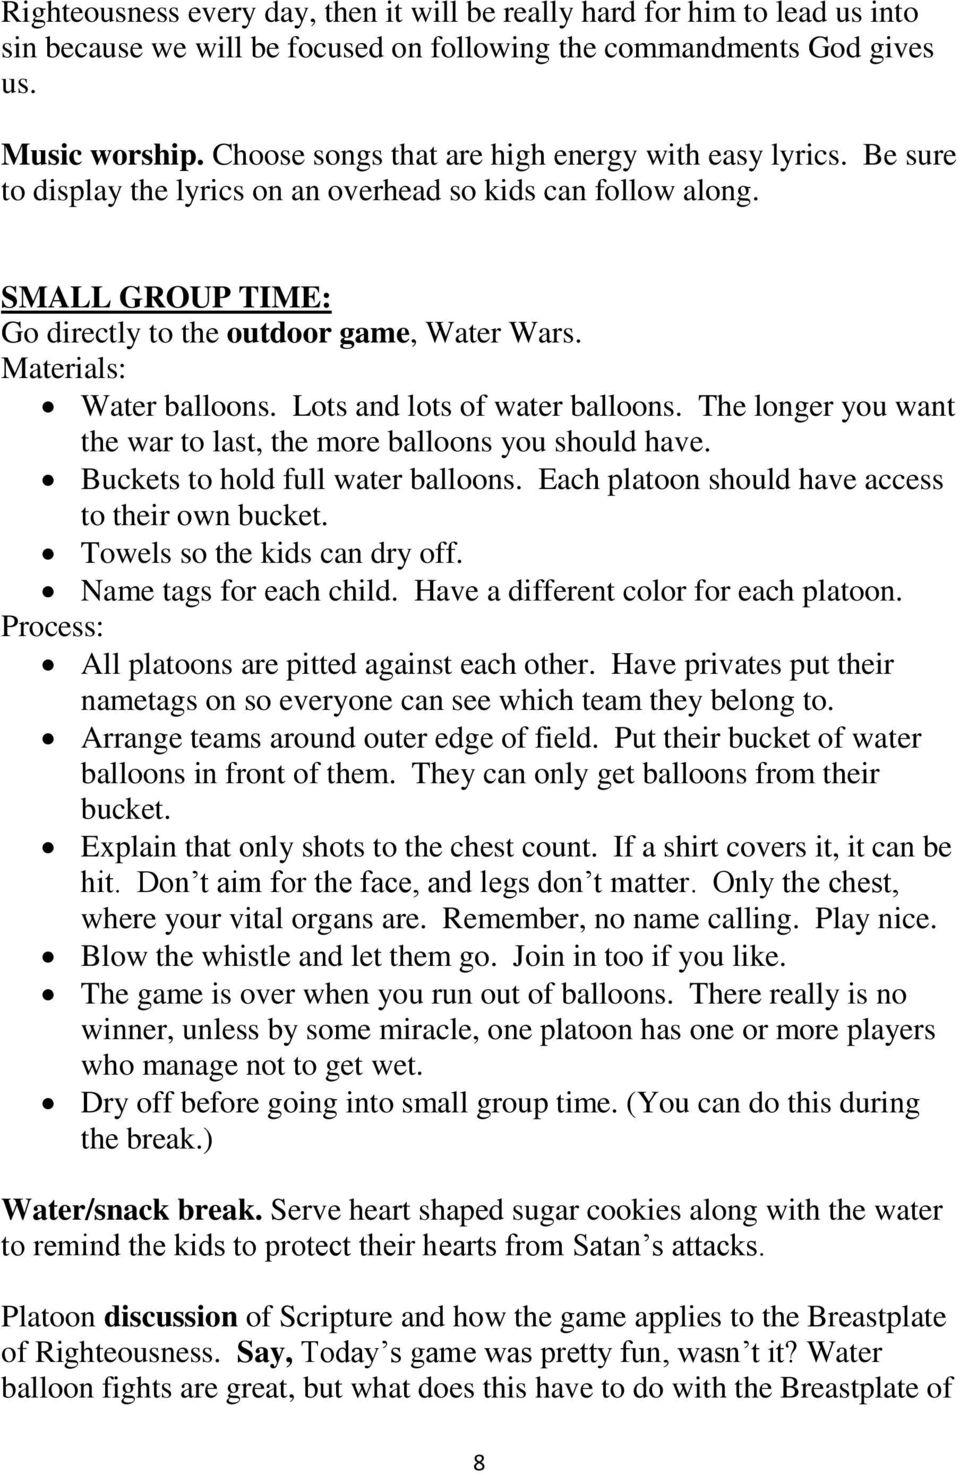 Materials: Water balloons. Lots and lots of water balloons. The longer you want the war to last, the more balloons you should have. Buckets to hold full water balloons.